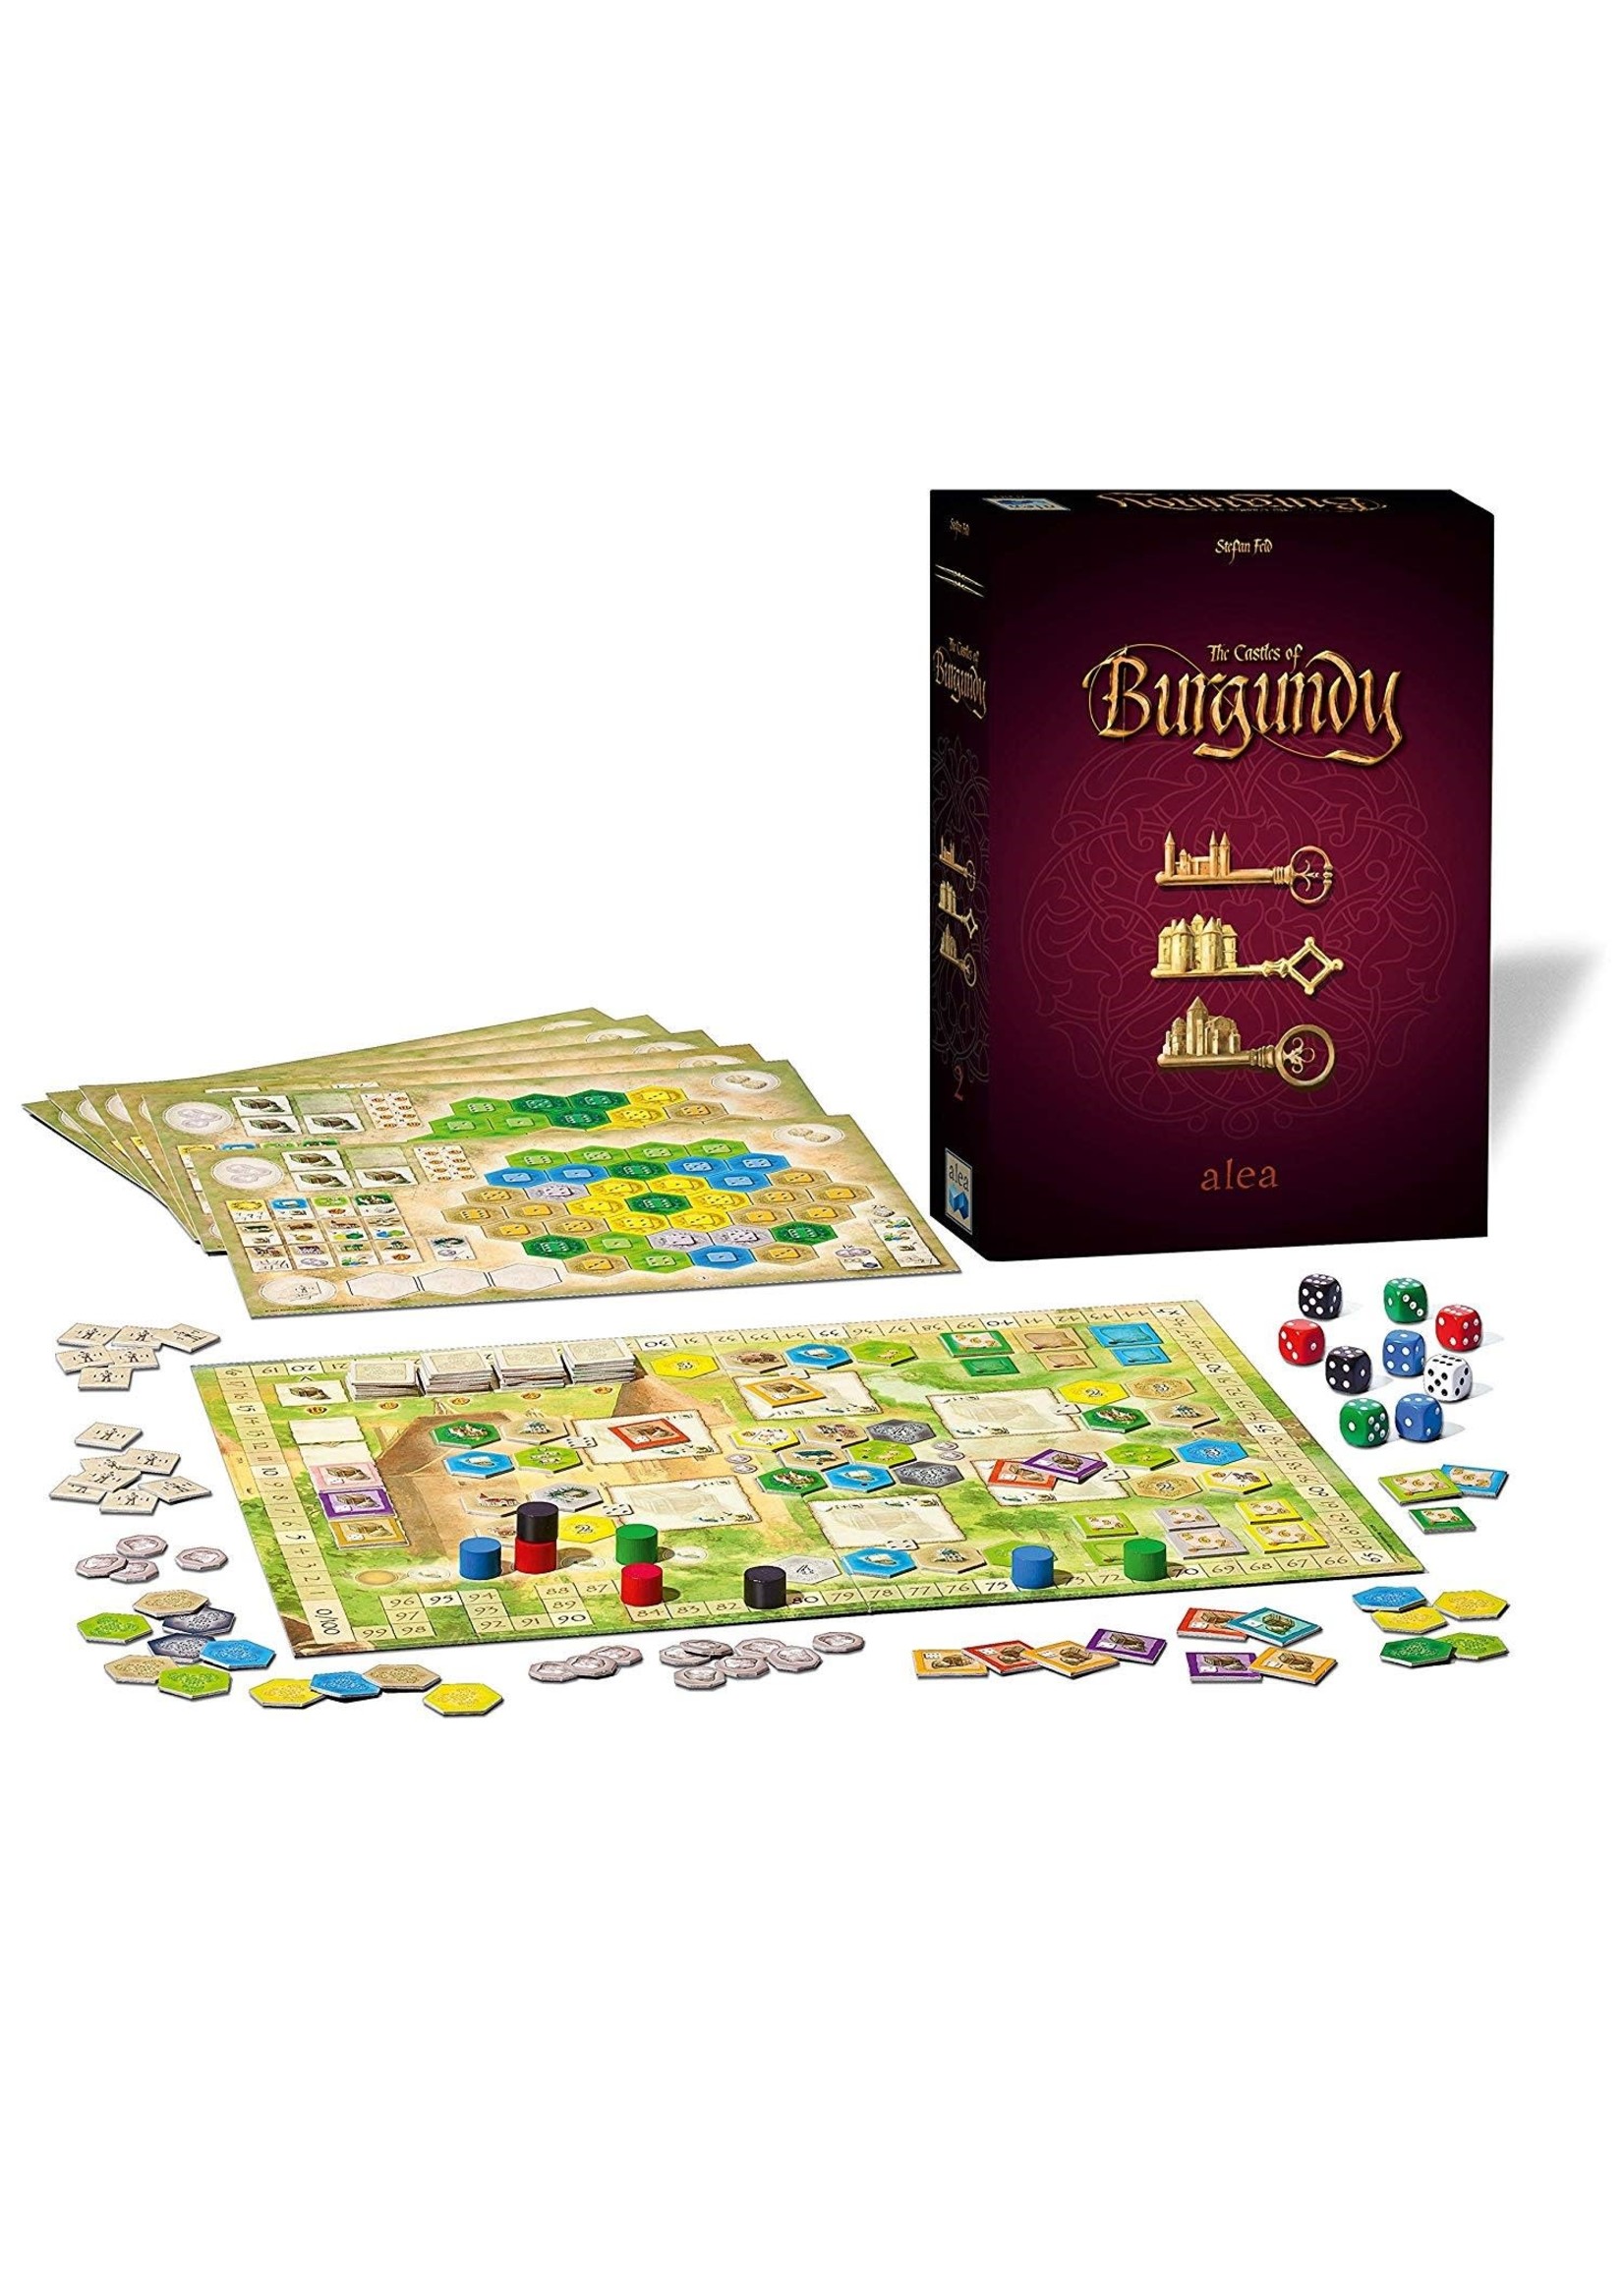 Ravensberger The Castles of Burgundy 20th Anniversary Edition